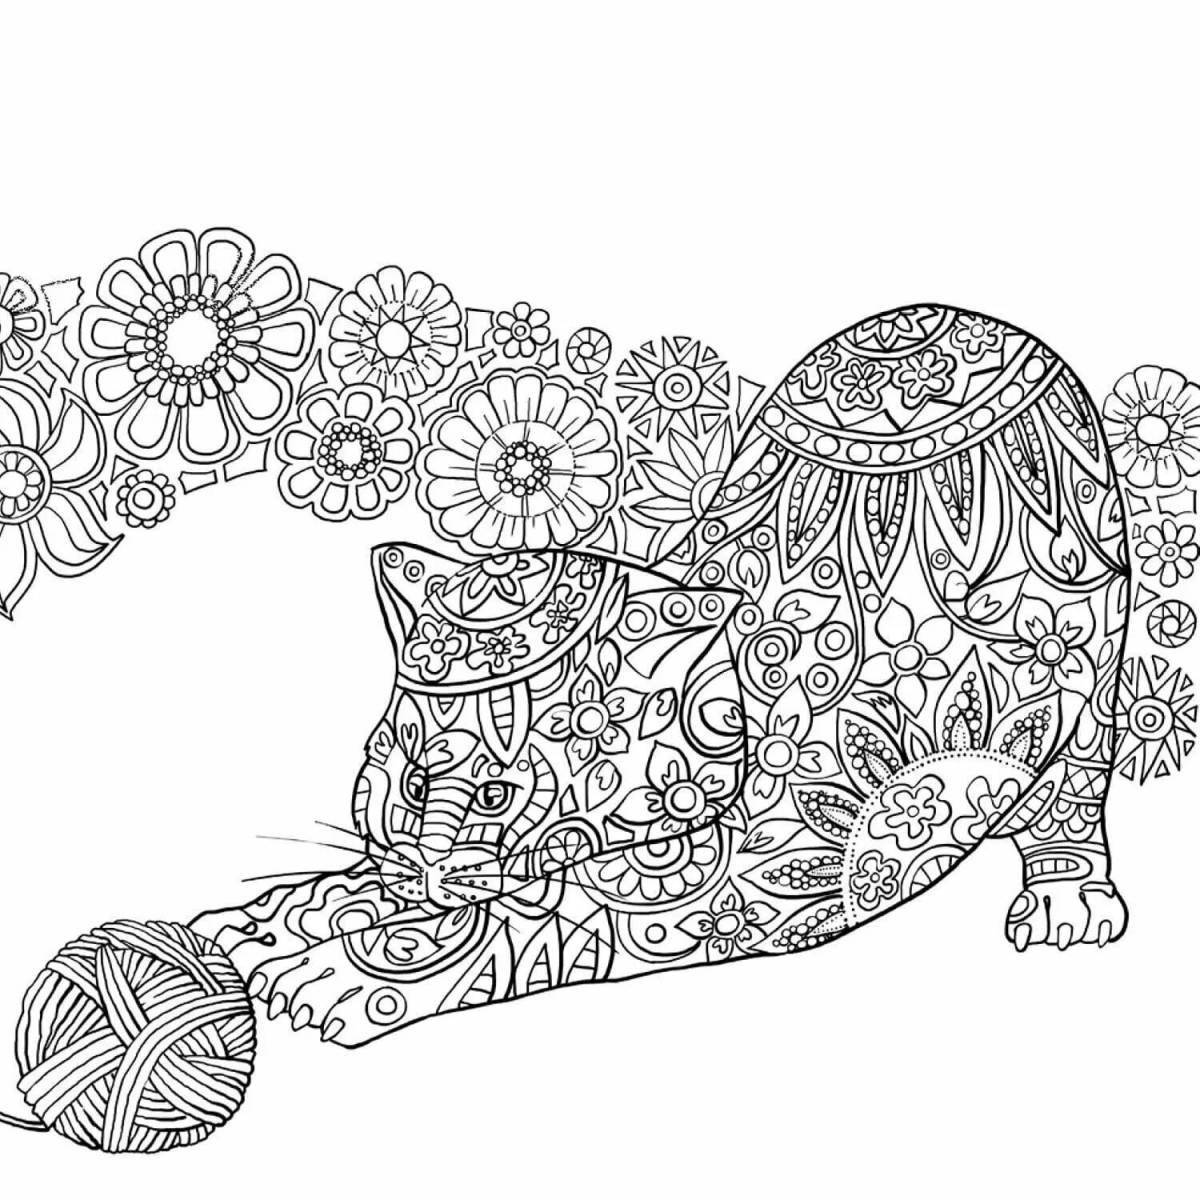 Great anti-stress coloring page 18